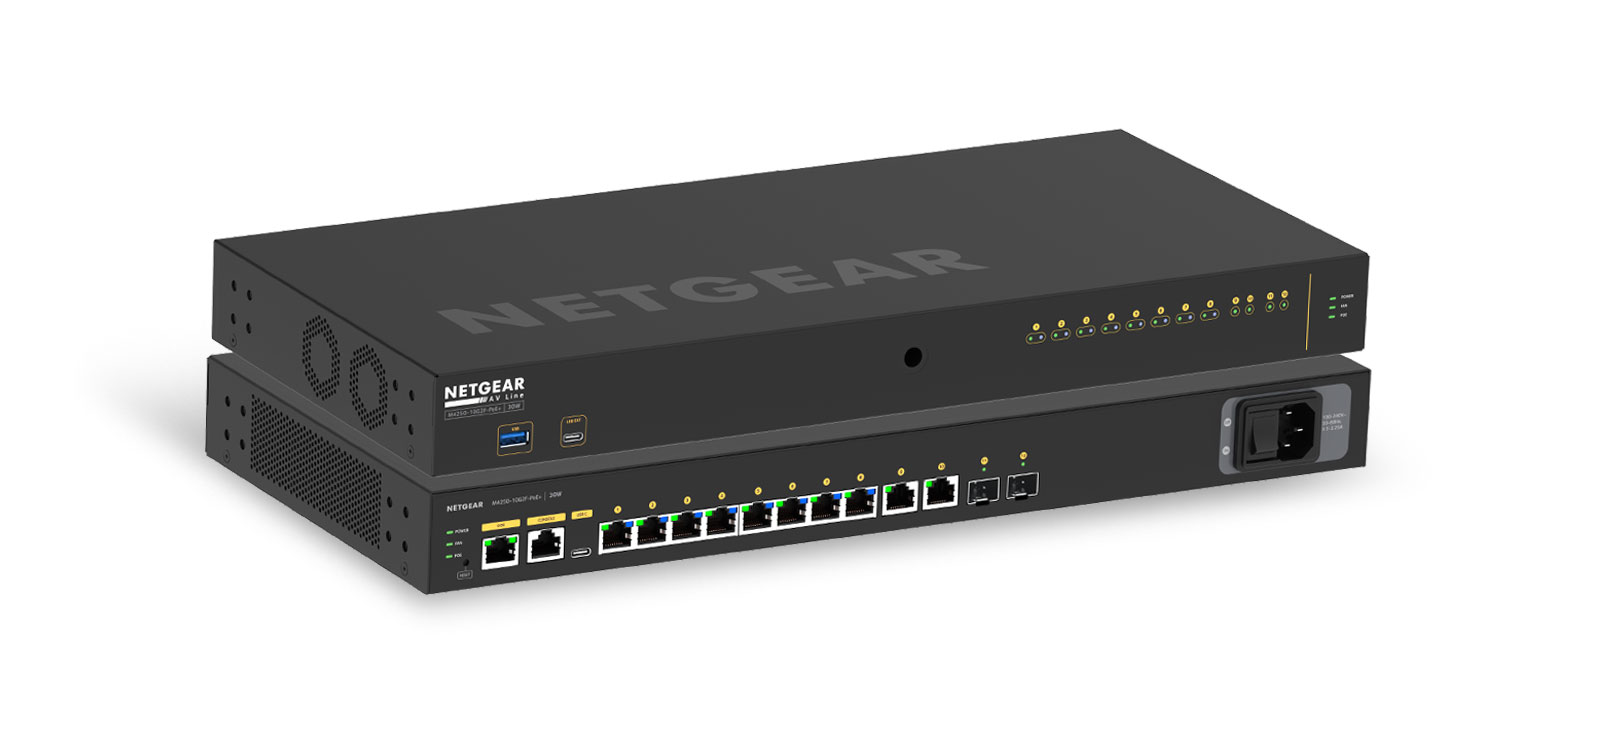 How To Access Netgear Network Switch